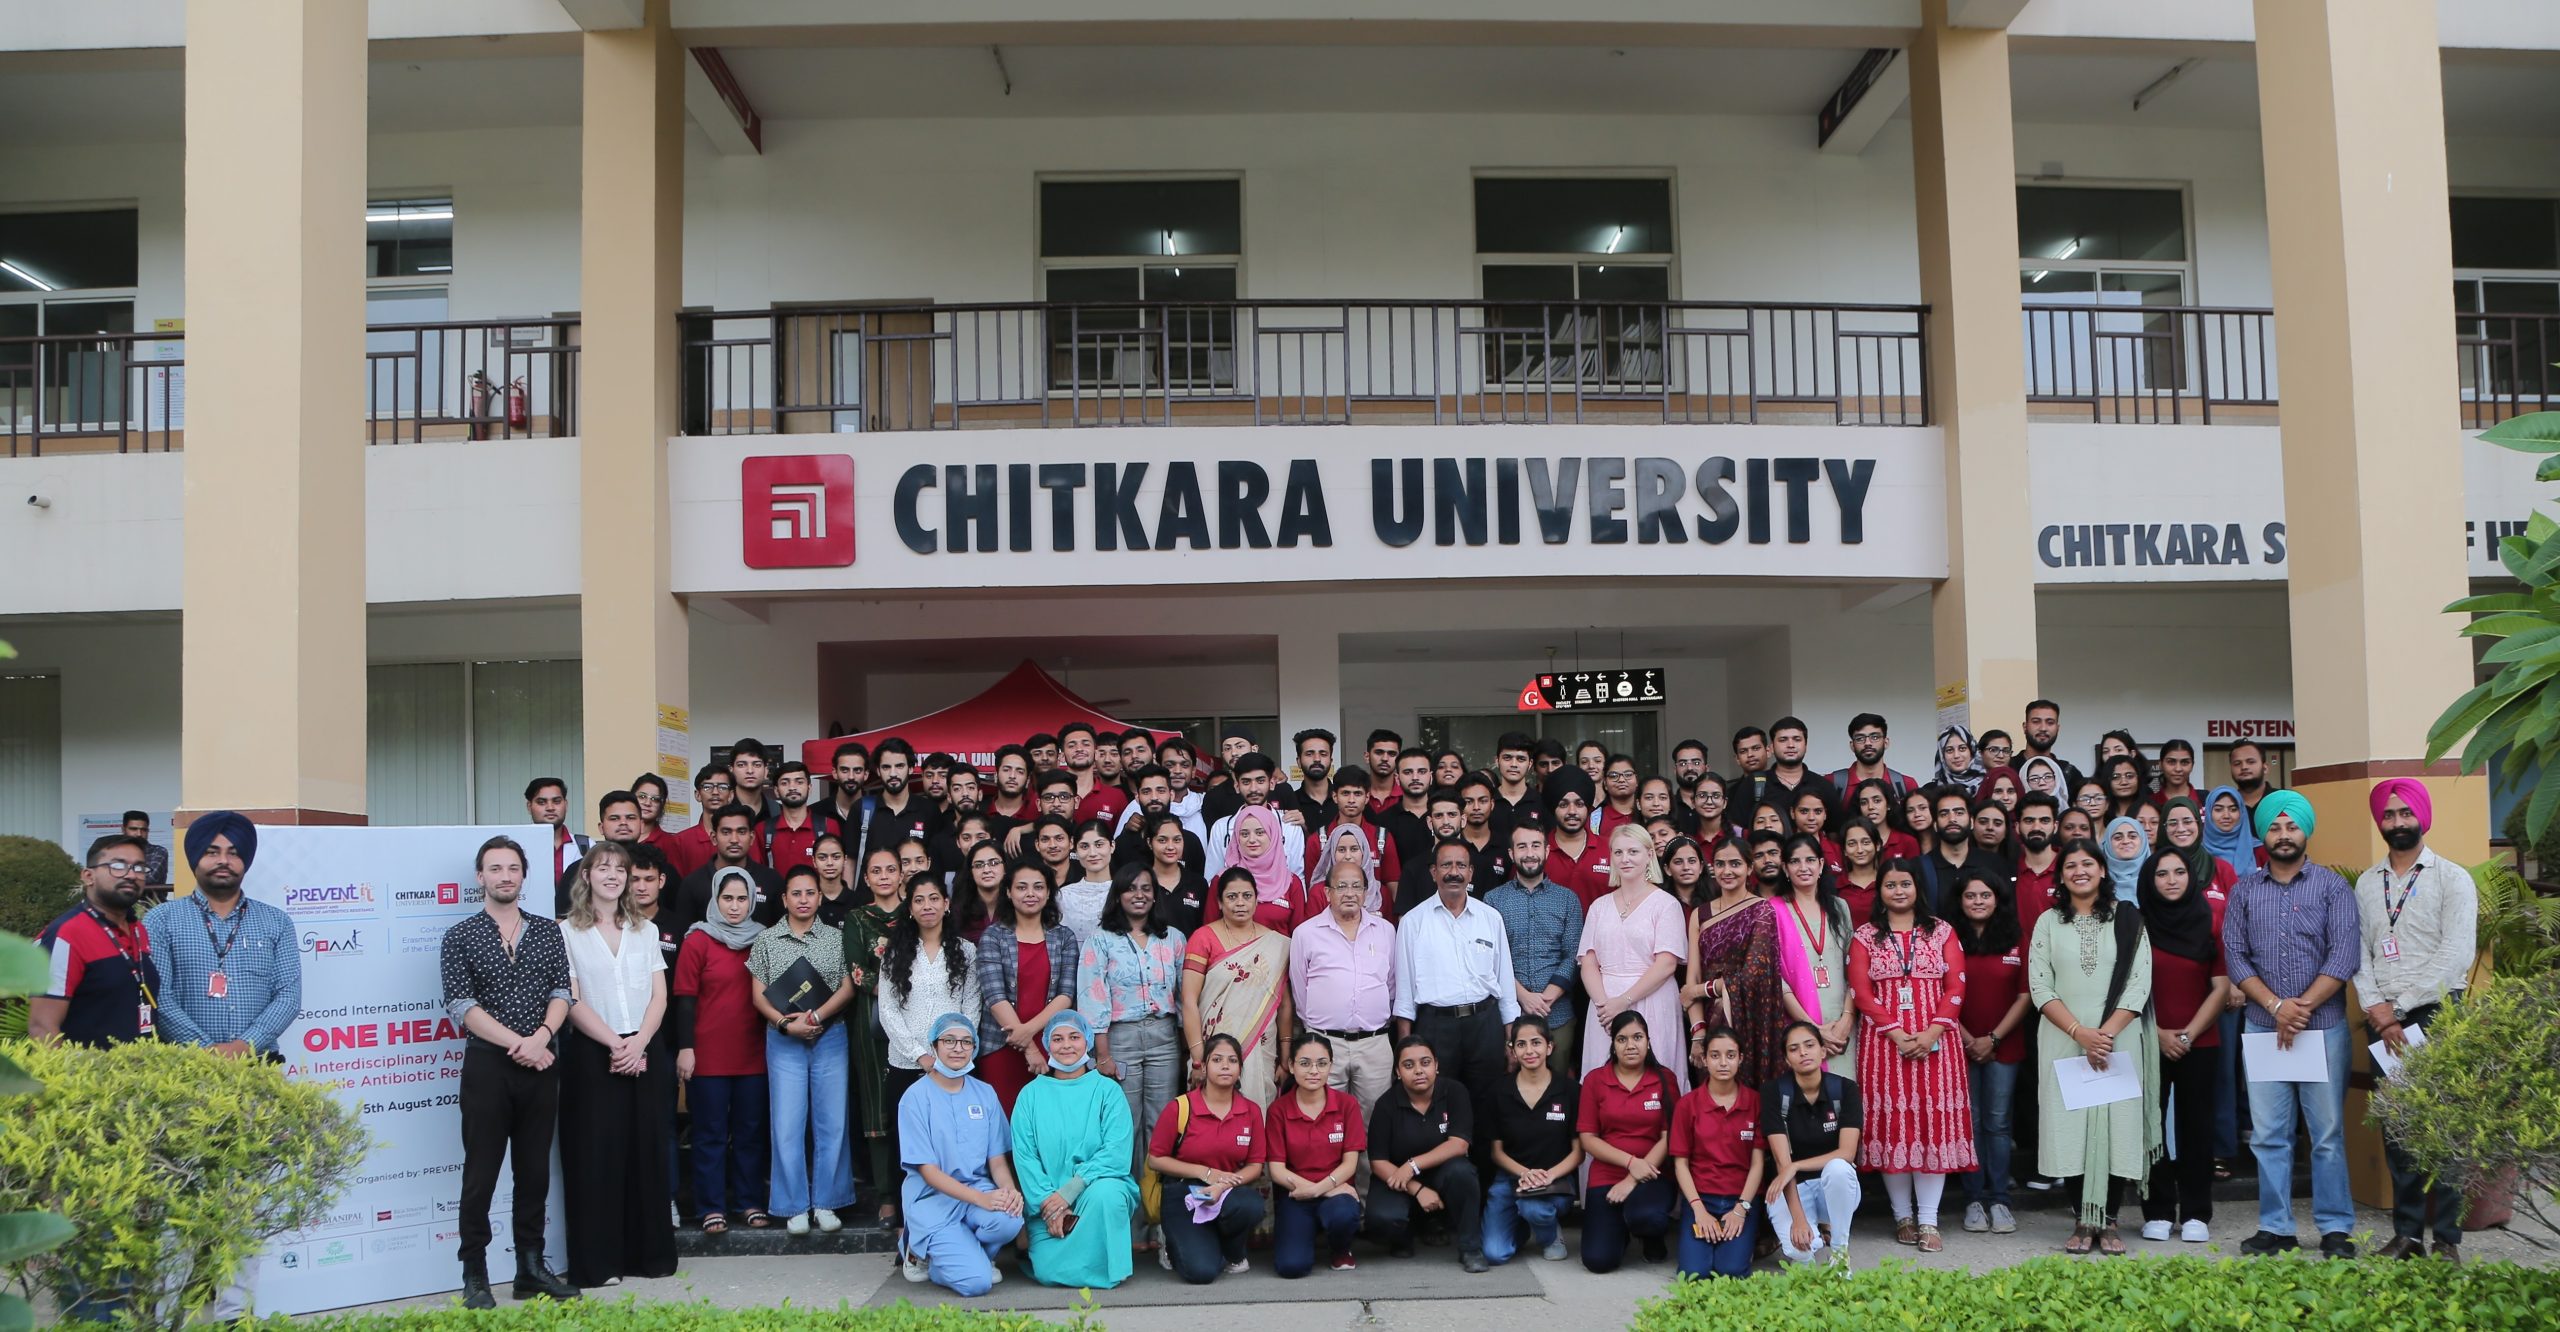 Second International Workshop on ‘One Health: An Interdisciplinary Approach to Tackle Antibiotic Resistance’ by Chitkara University, Punjab, India